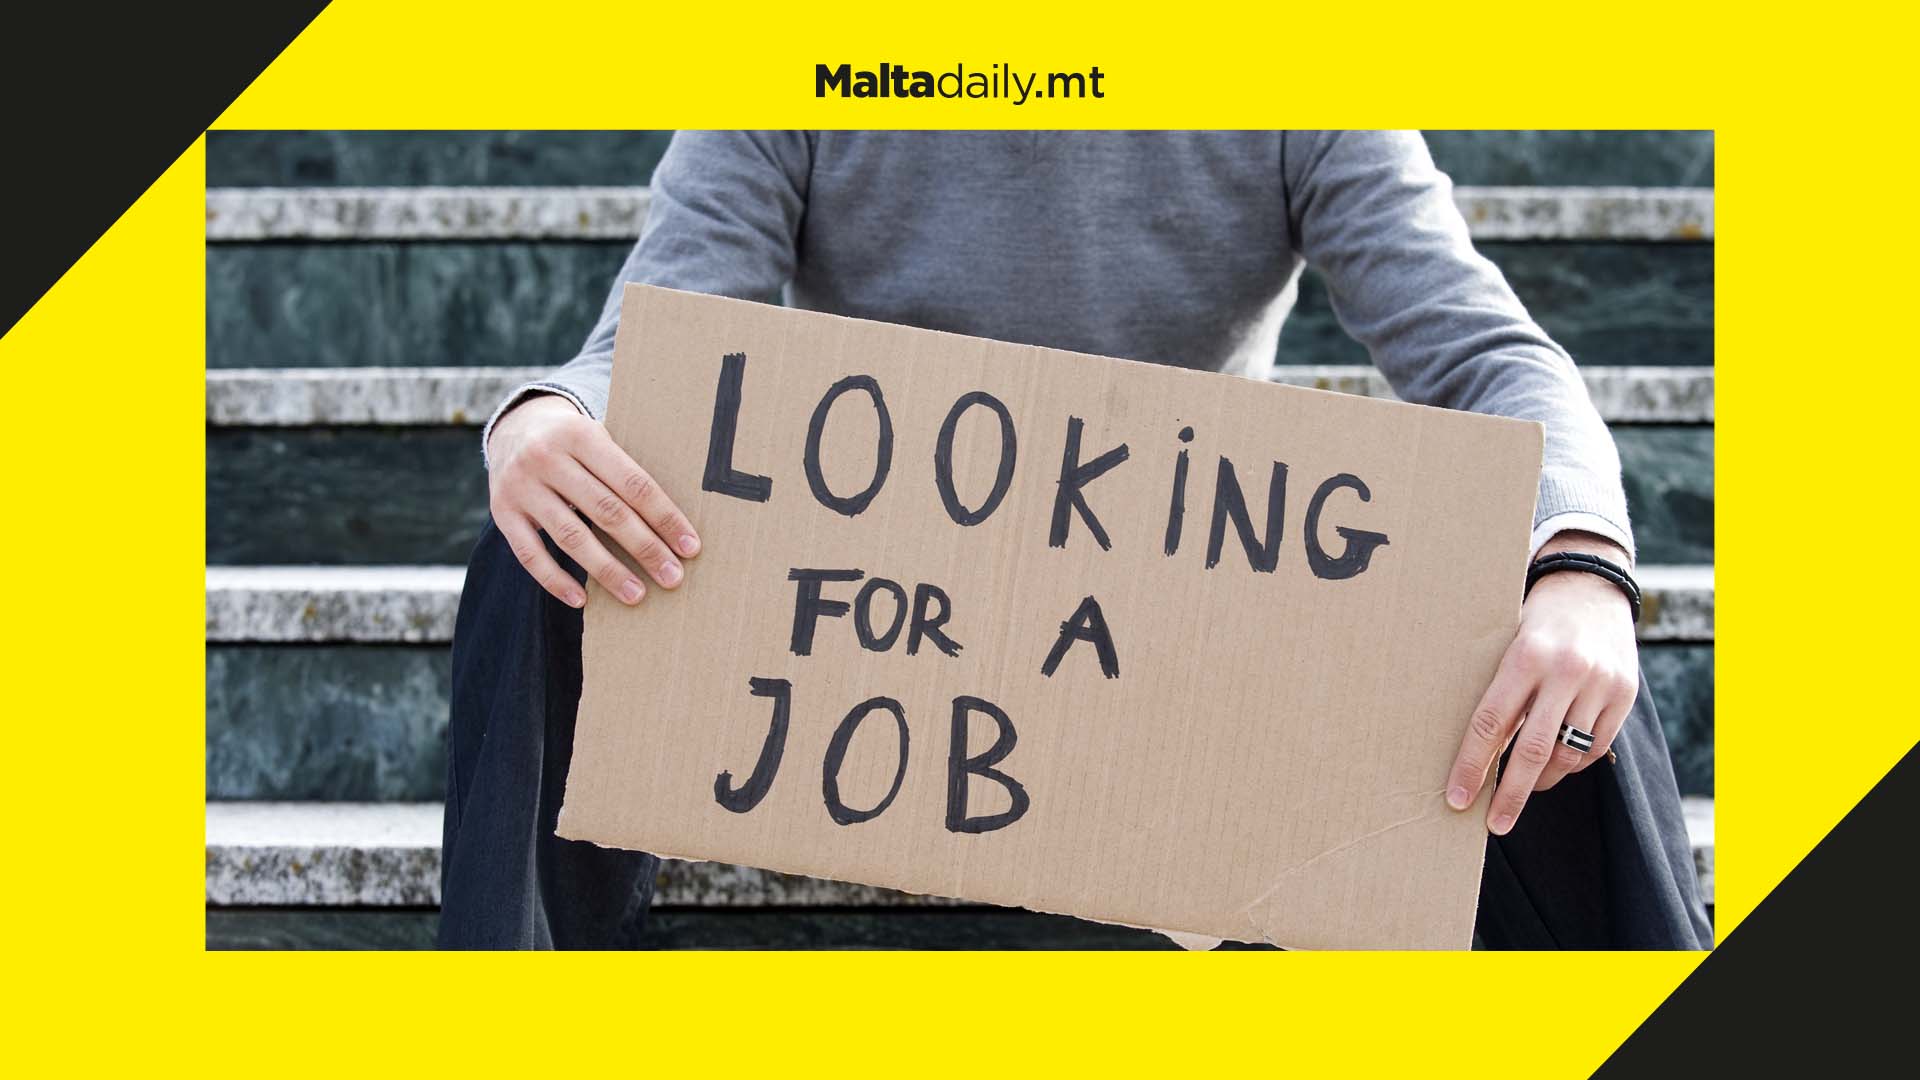 Unemployment at its lowest level in 10 years in Malta